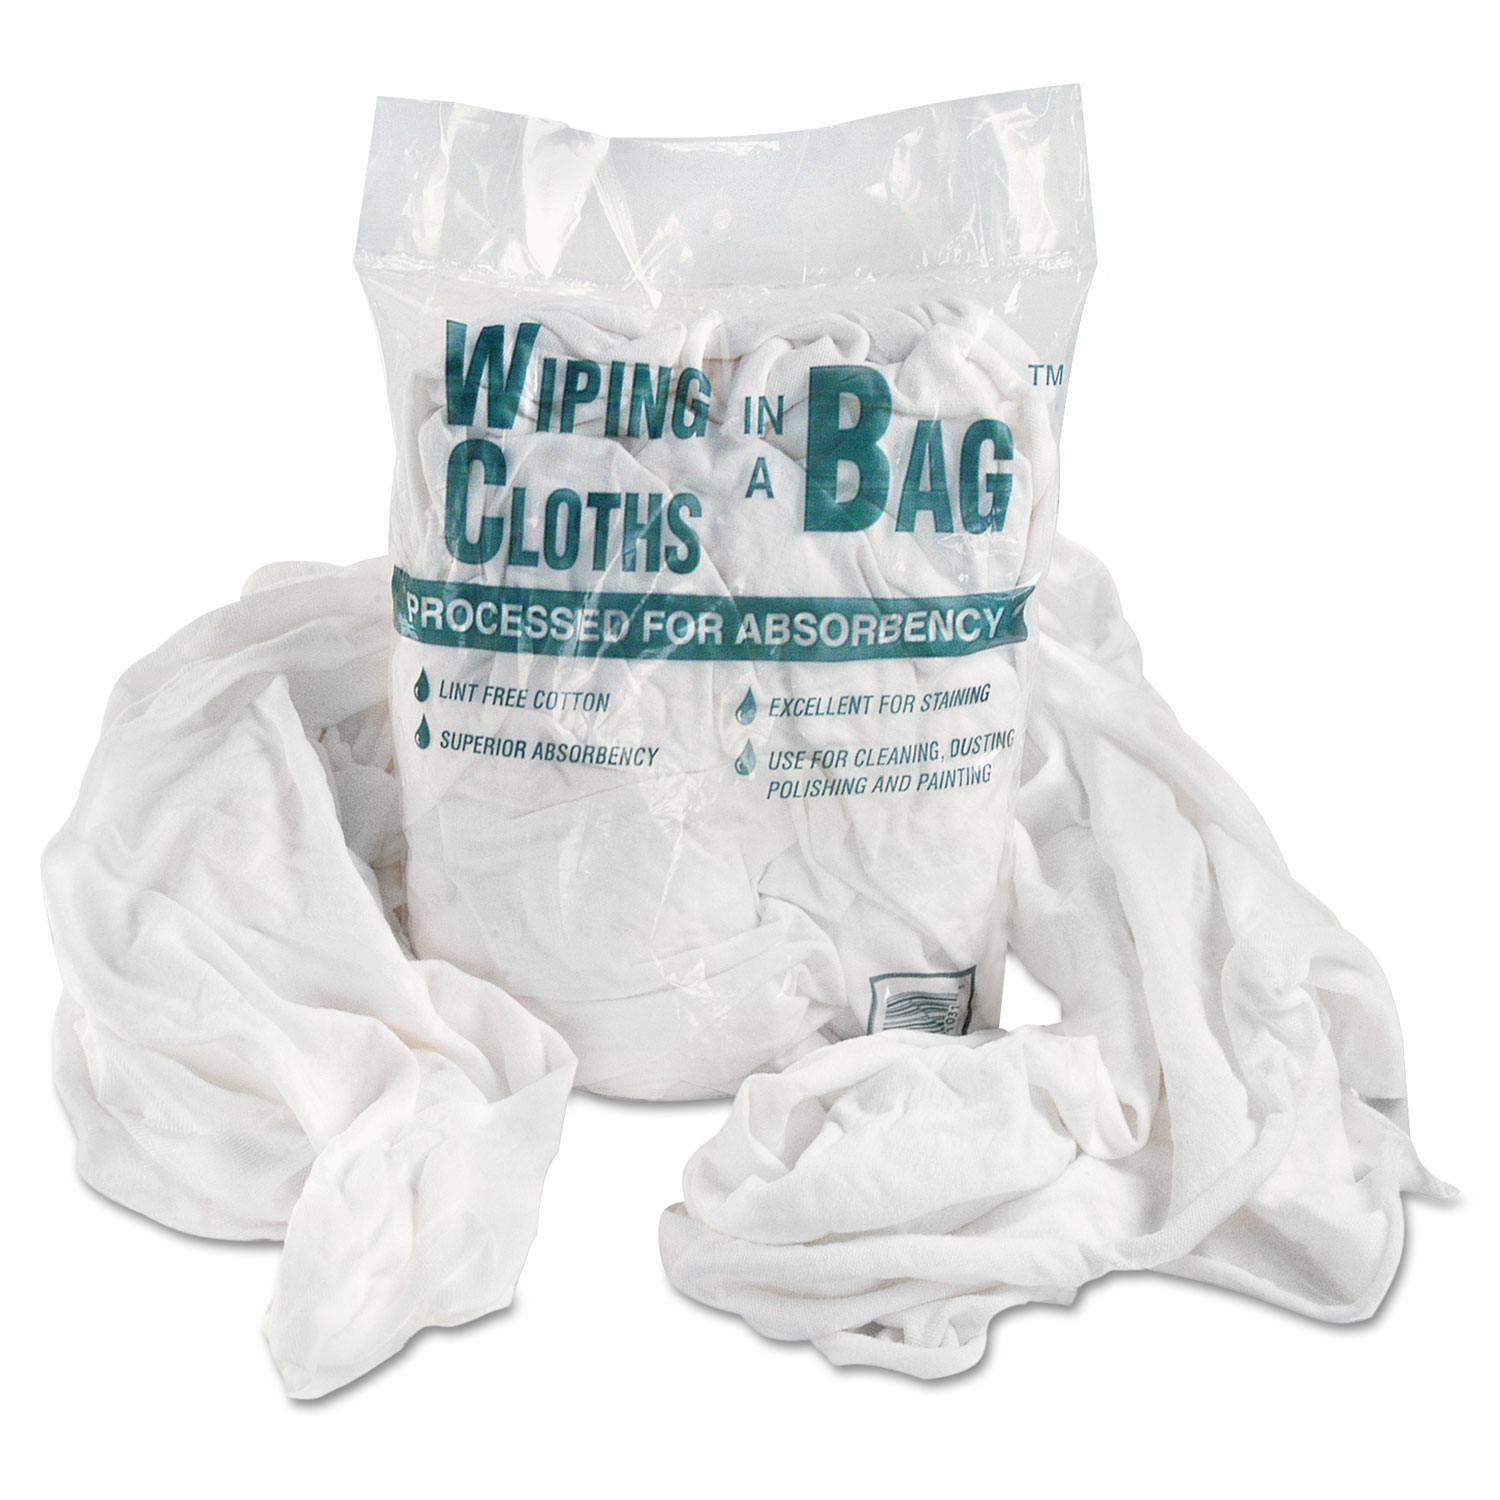 General Supply UFSN250CW01 Bag-A-Rags Reusable Wiping Cloths, Cotton, White, 1lb Pack